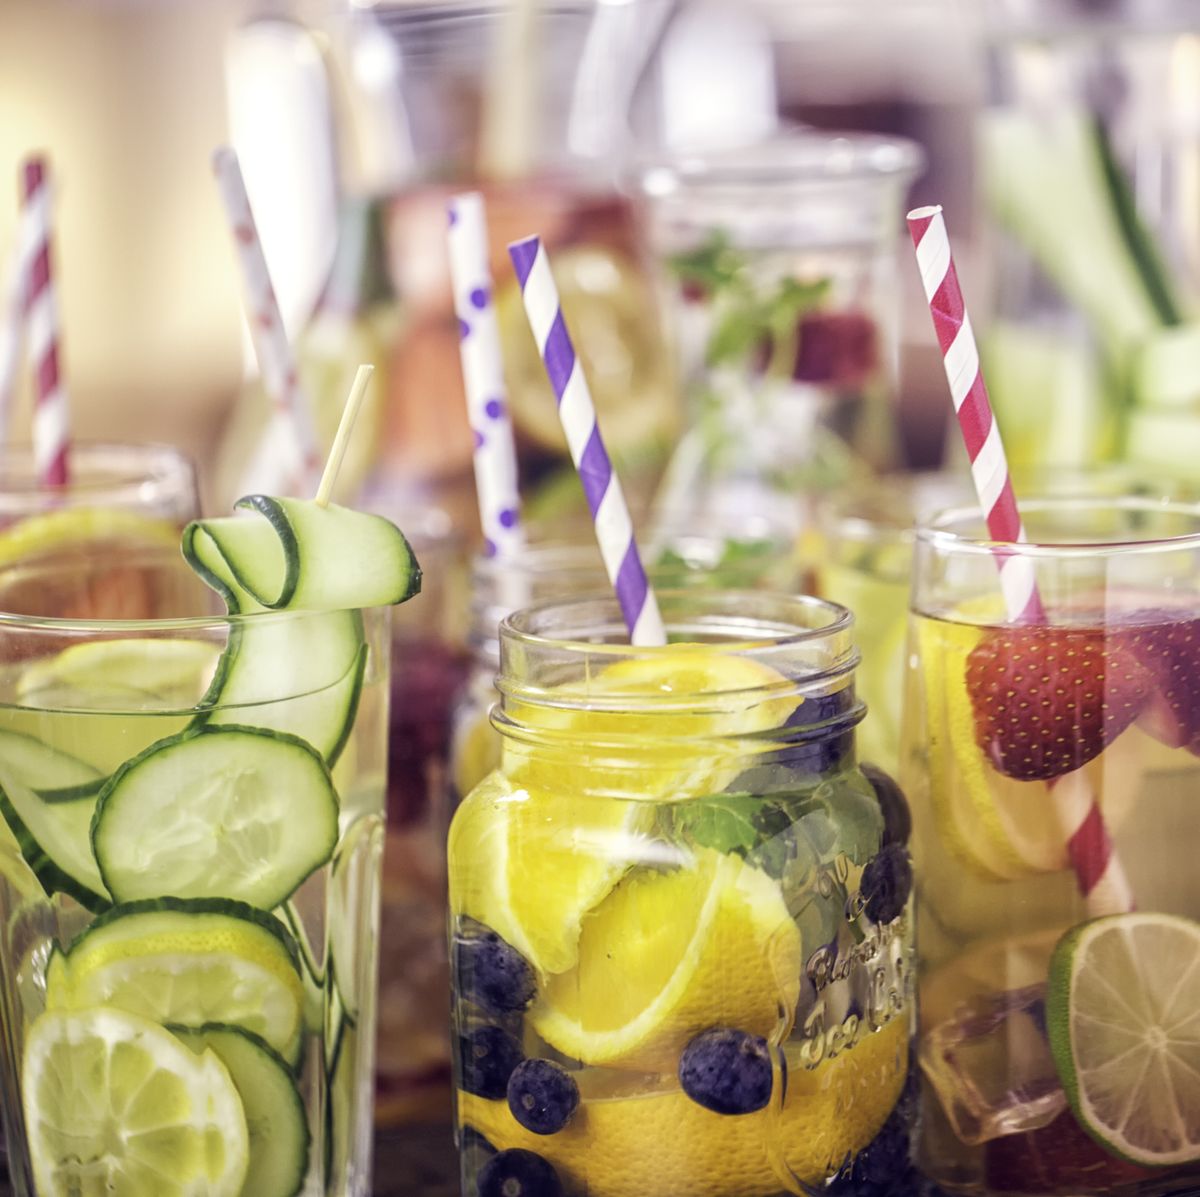 https://hips.hearstapps.com/hmg-prod/images/variation-of-infused-water-with-fresh-fruits-royalty-free-image-1626116241.jpg?crop=0.668xw:1.00xh;0.167xw,0&resize=1200:*